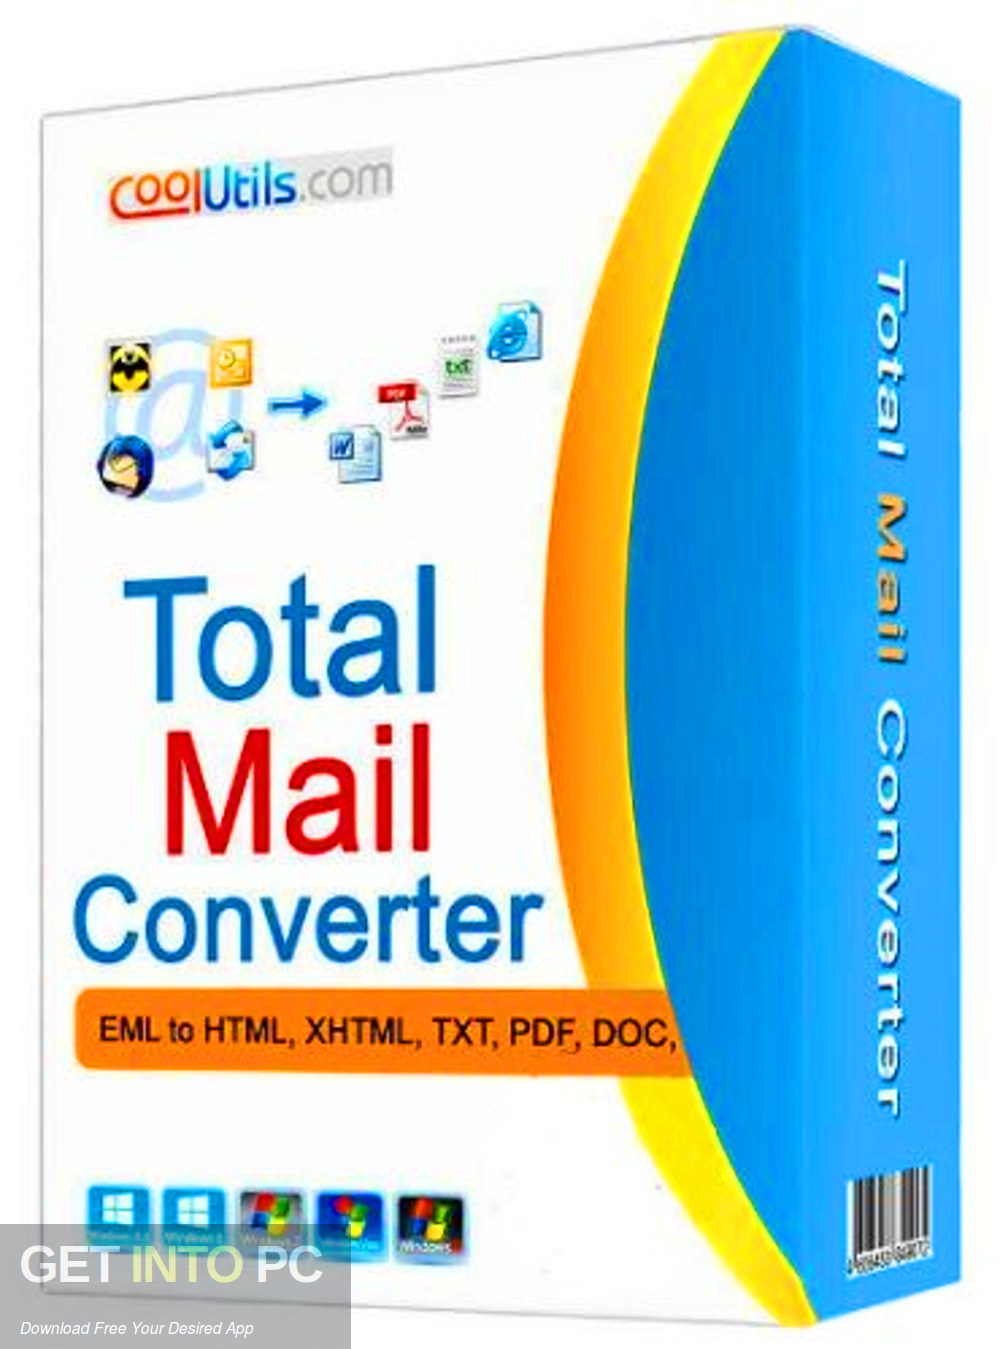 Coolutils Total Mail Converter Pro Free Download GetintoPC.com